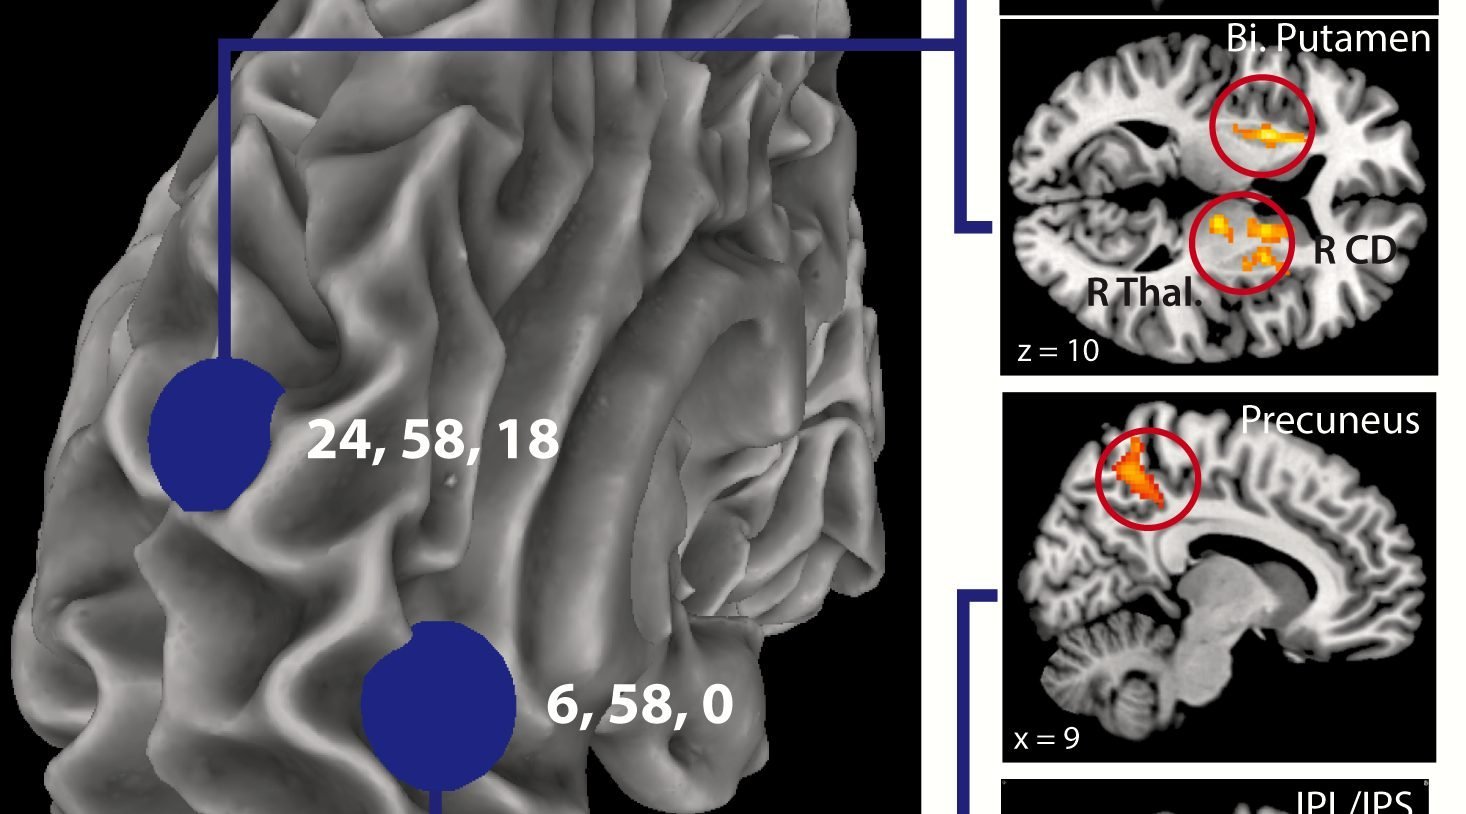 The image shows the fMRI results for the study. The caption best describes the image.